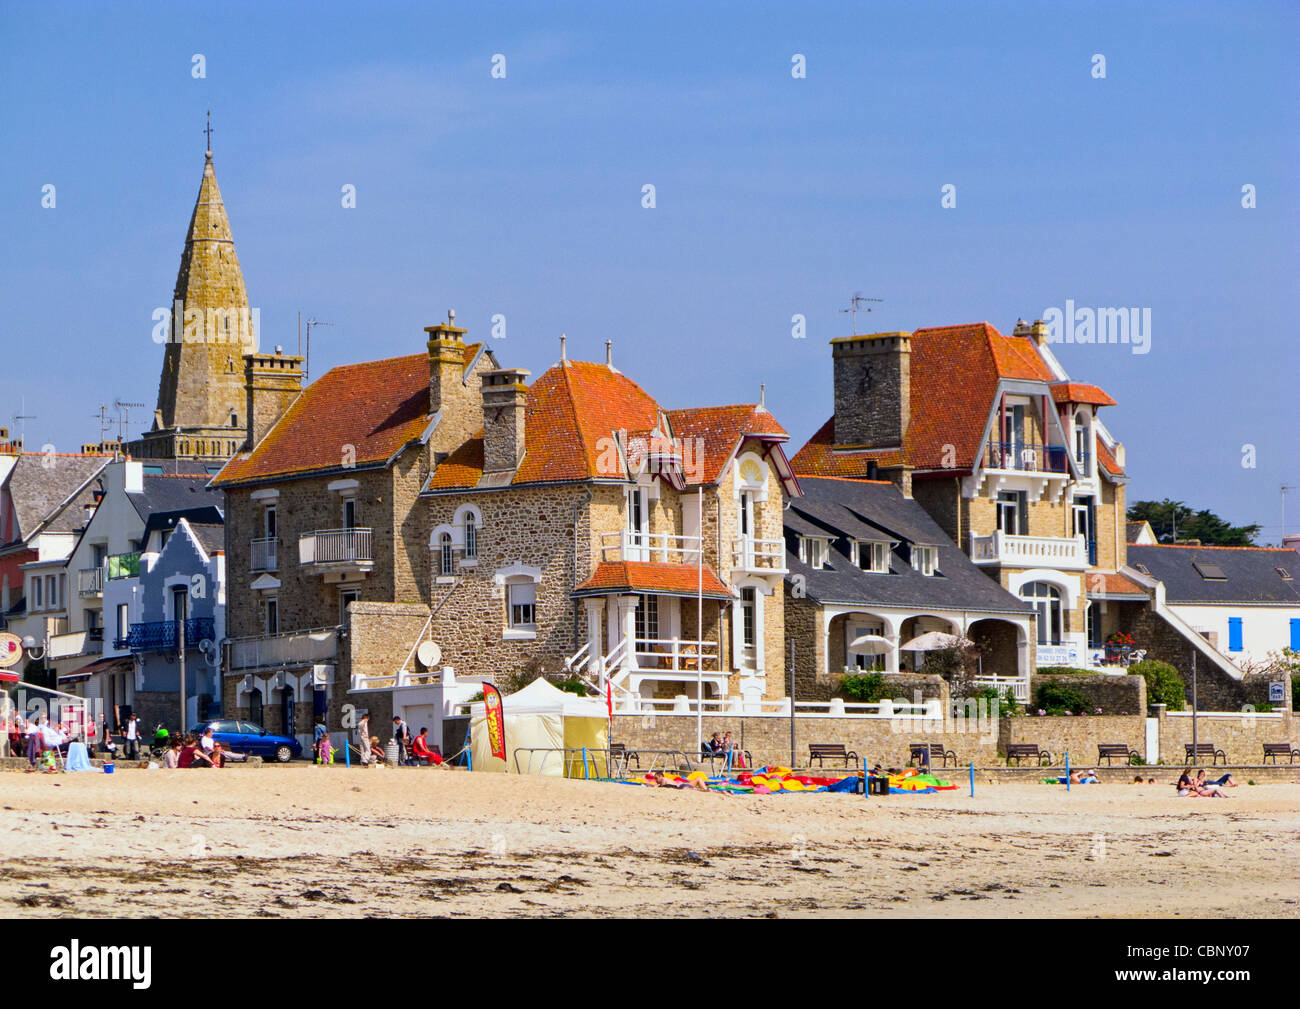 Houses on the seafront in the resort town of Lamor Plage, Morbihan, Brittany, France Stock Photo